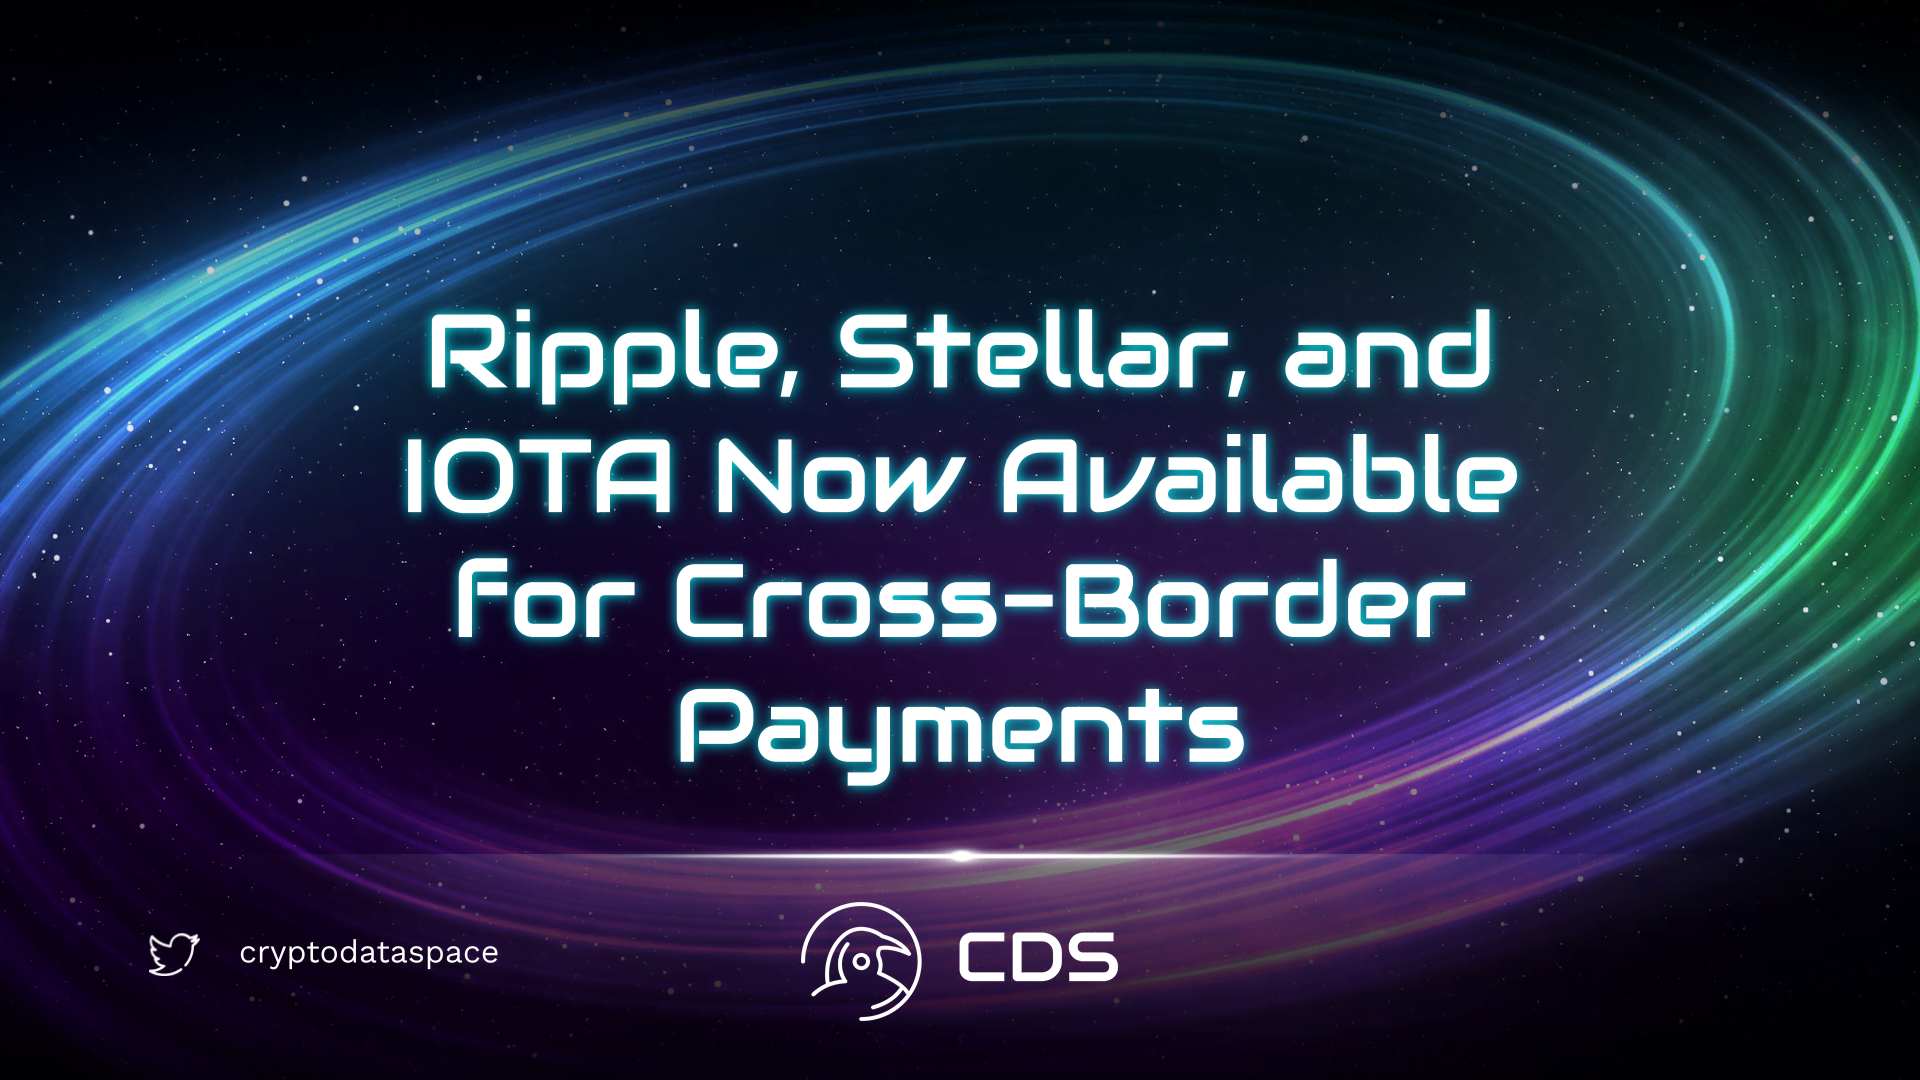 Ripple, Stellar, and IOTA Now Available for Cross-Border Payments